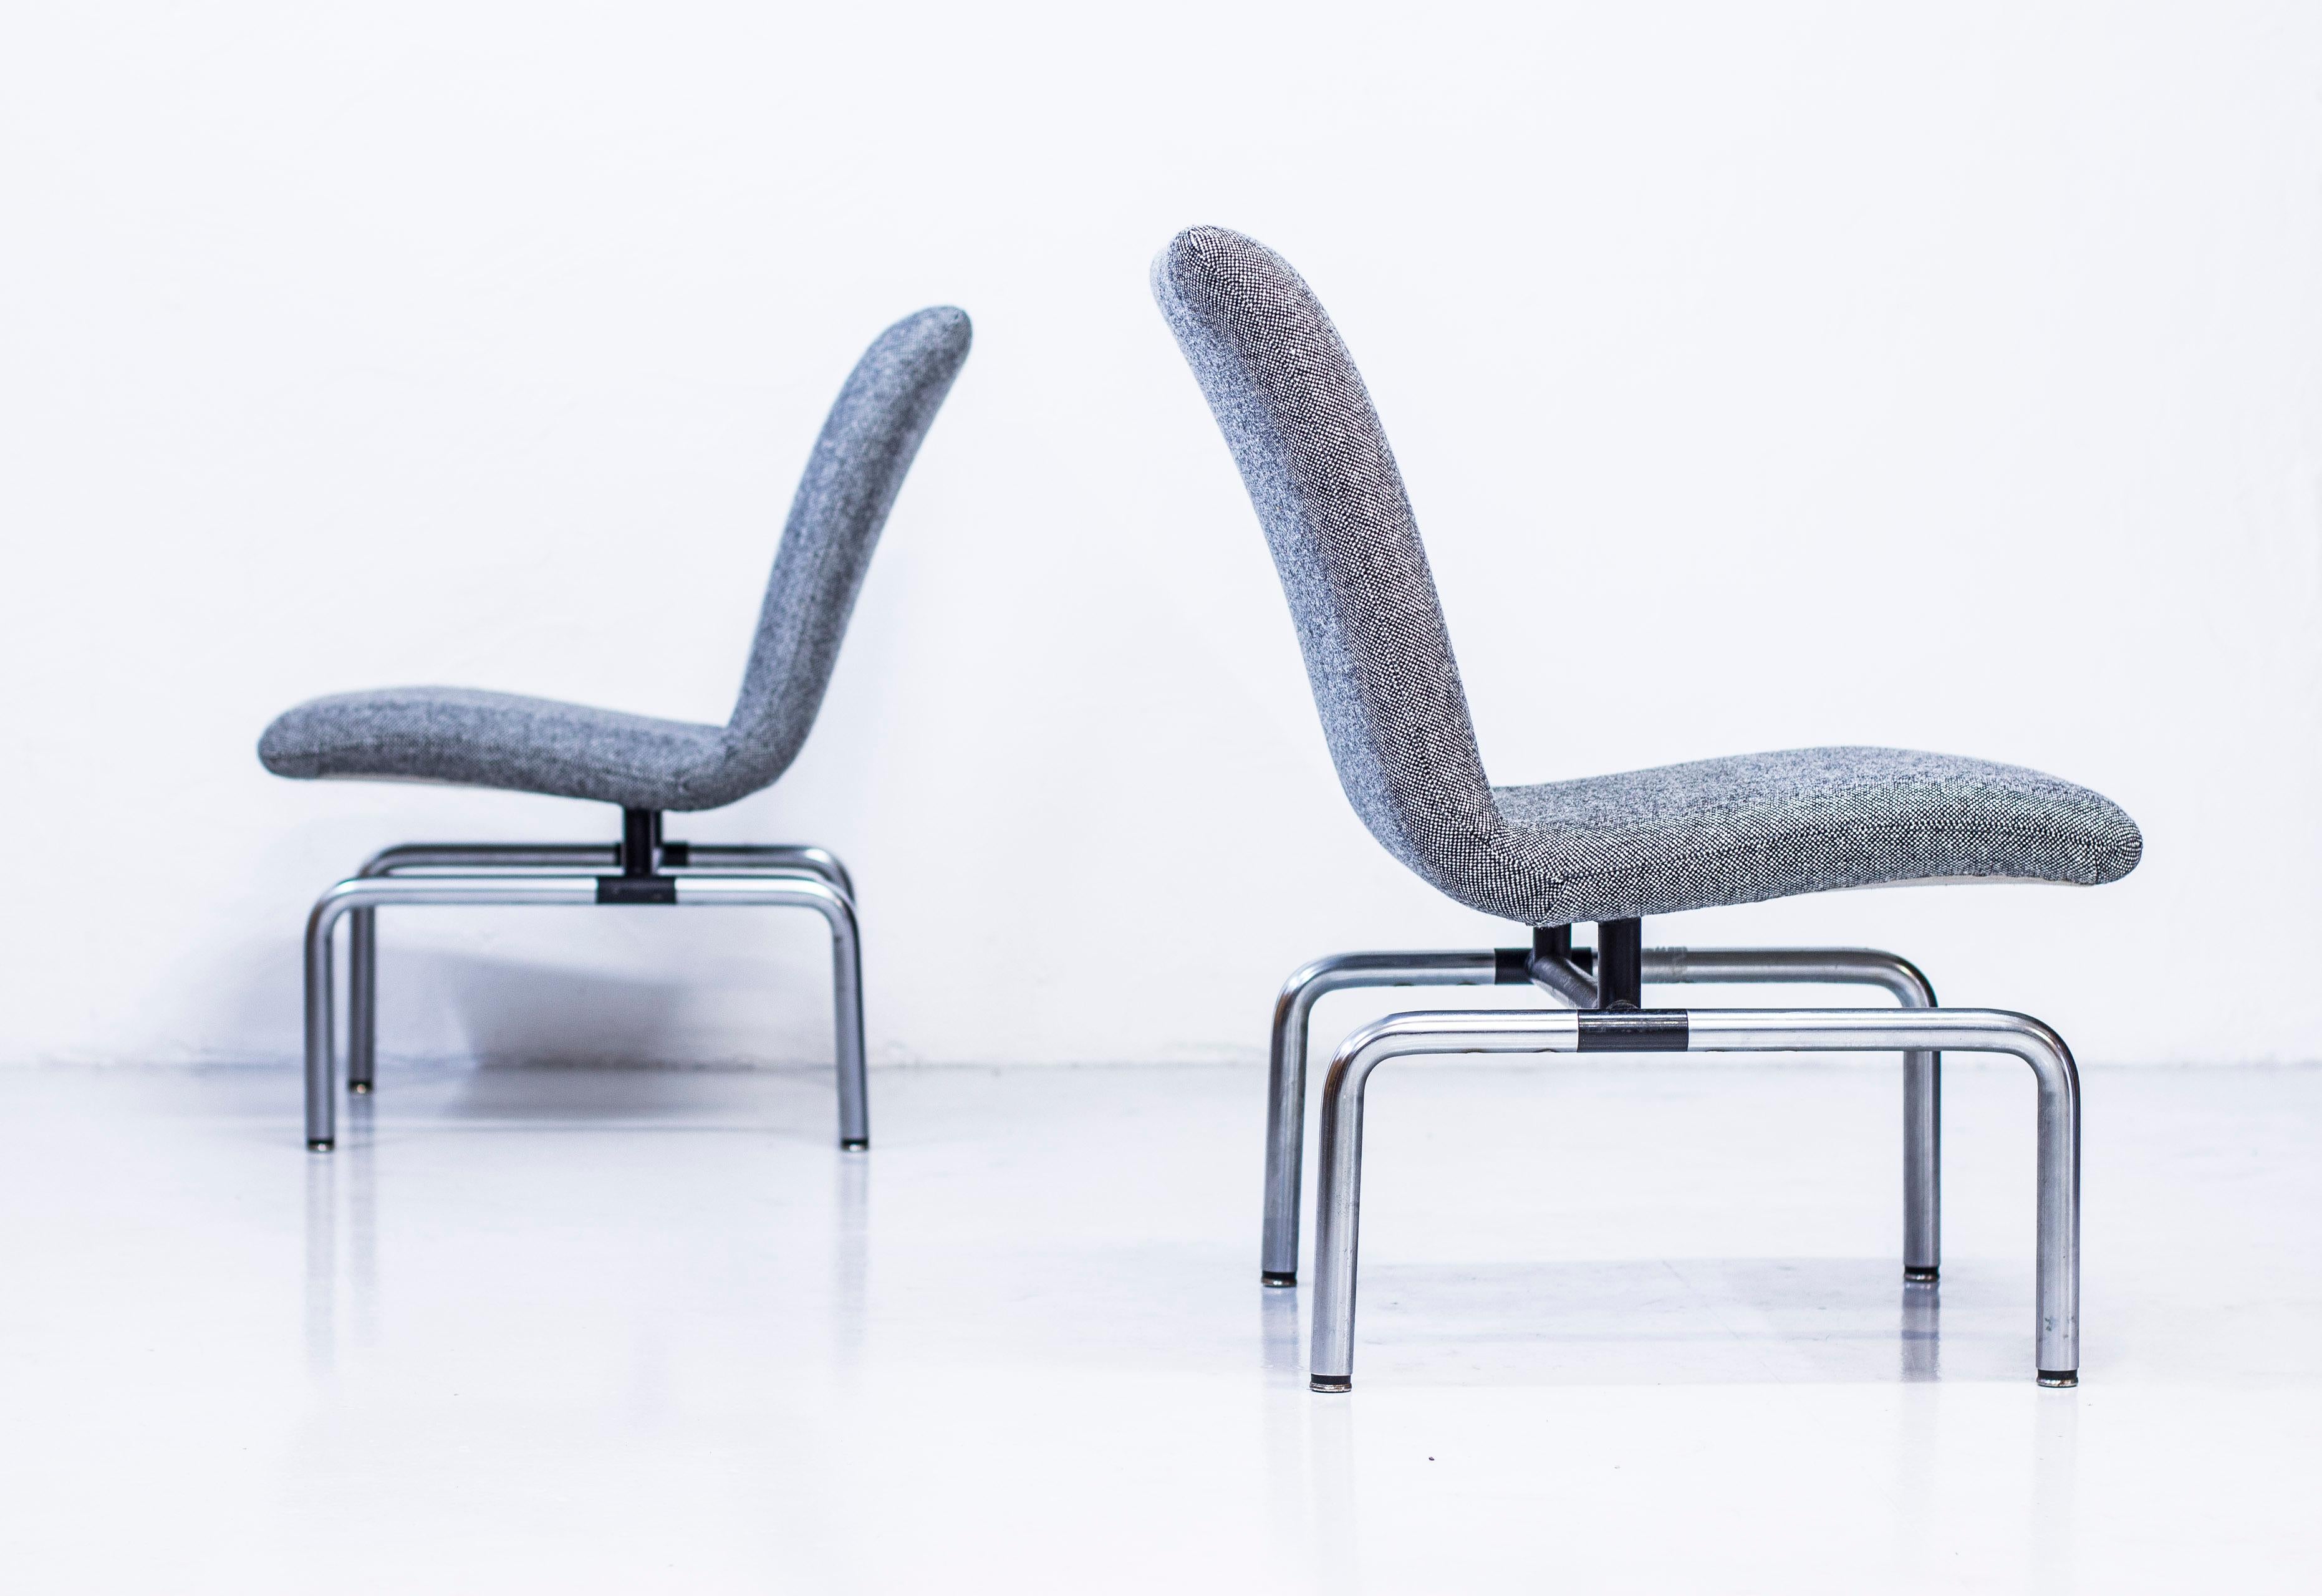 Easy chairs designed by Bondo Gravesen. Produced by his own company in Denmark during the 1970s. Made from chromed and black lacquered steel. Reupholstered in Hallingdal 65 wool fabric from Kvadrat. Very good condition with slight age related patina